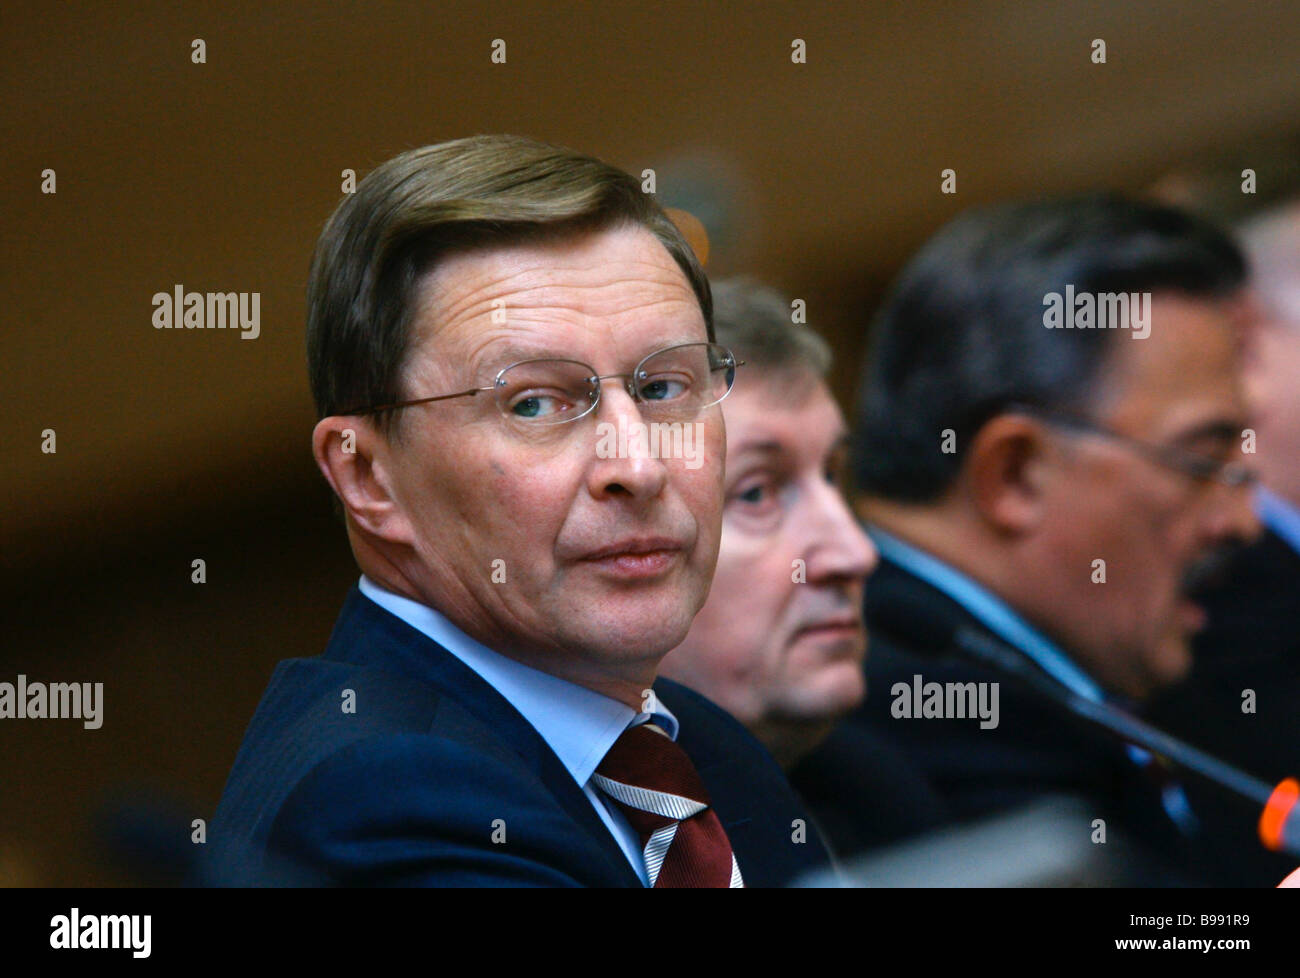 From left to right Russian Deputy Prime Minster <b>Sergei Ivanov</b> and ... - from-left-to-right-russian-deputy-prime-minster-sergei-ivanov-and-B991R9